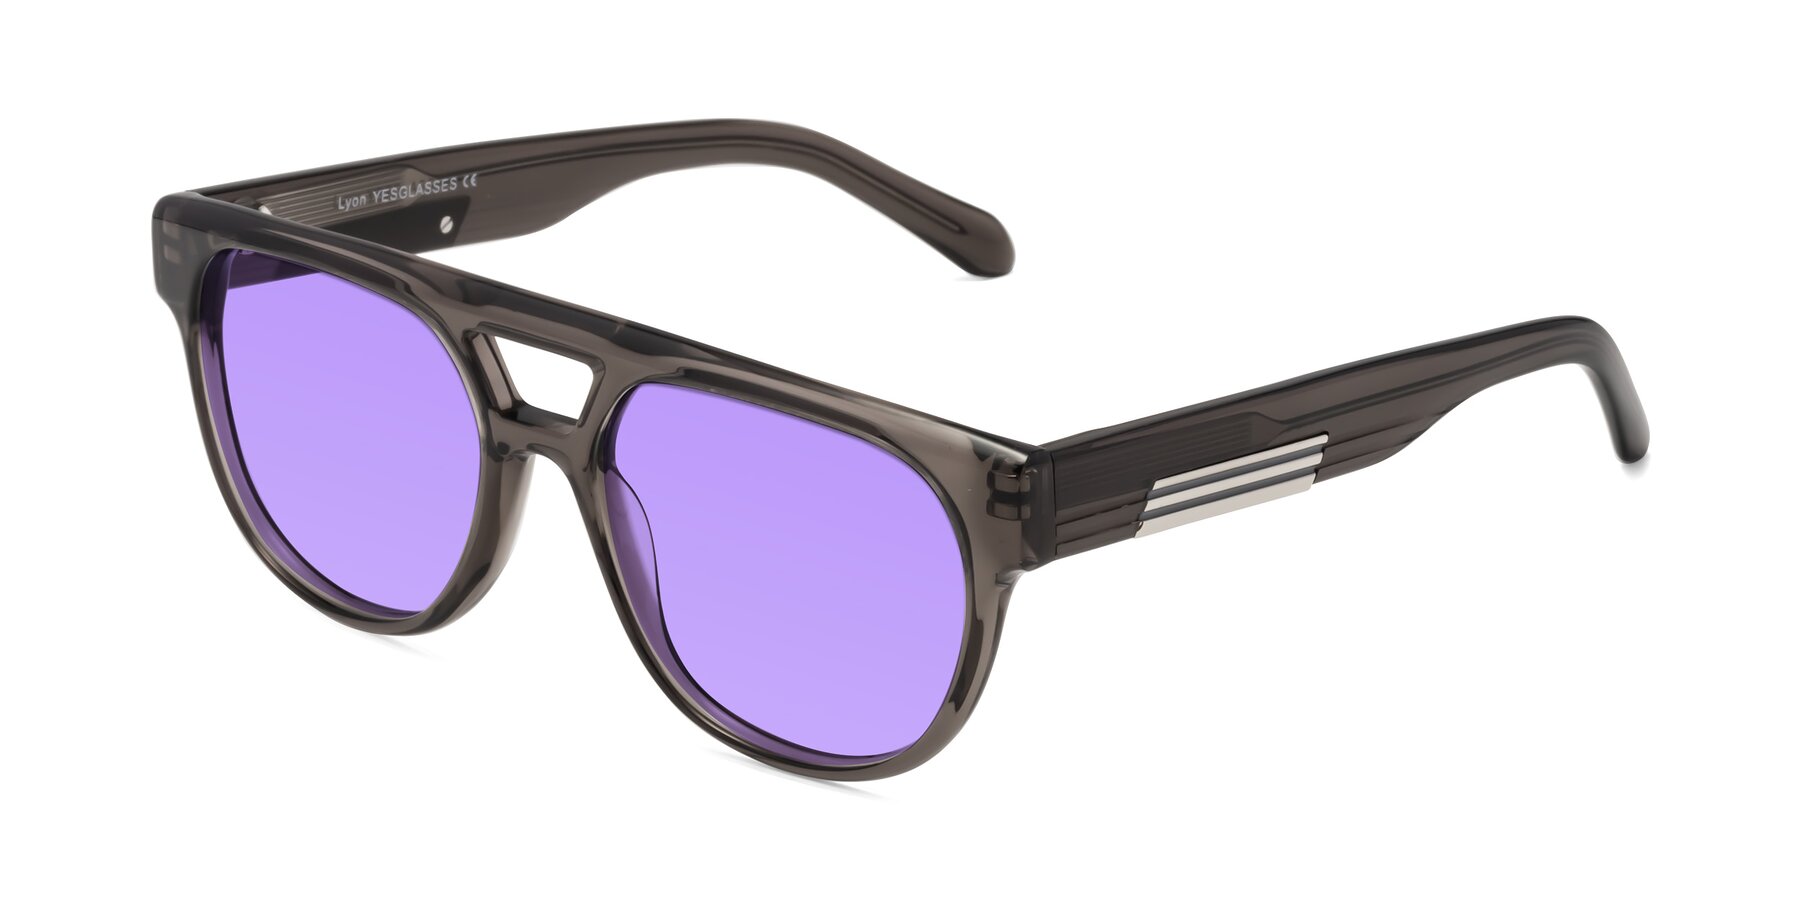 Angle of Lyon in Charcoal Gray with Medium Purple Tinted Lenses